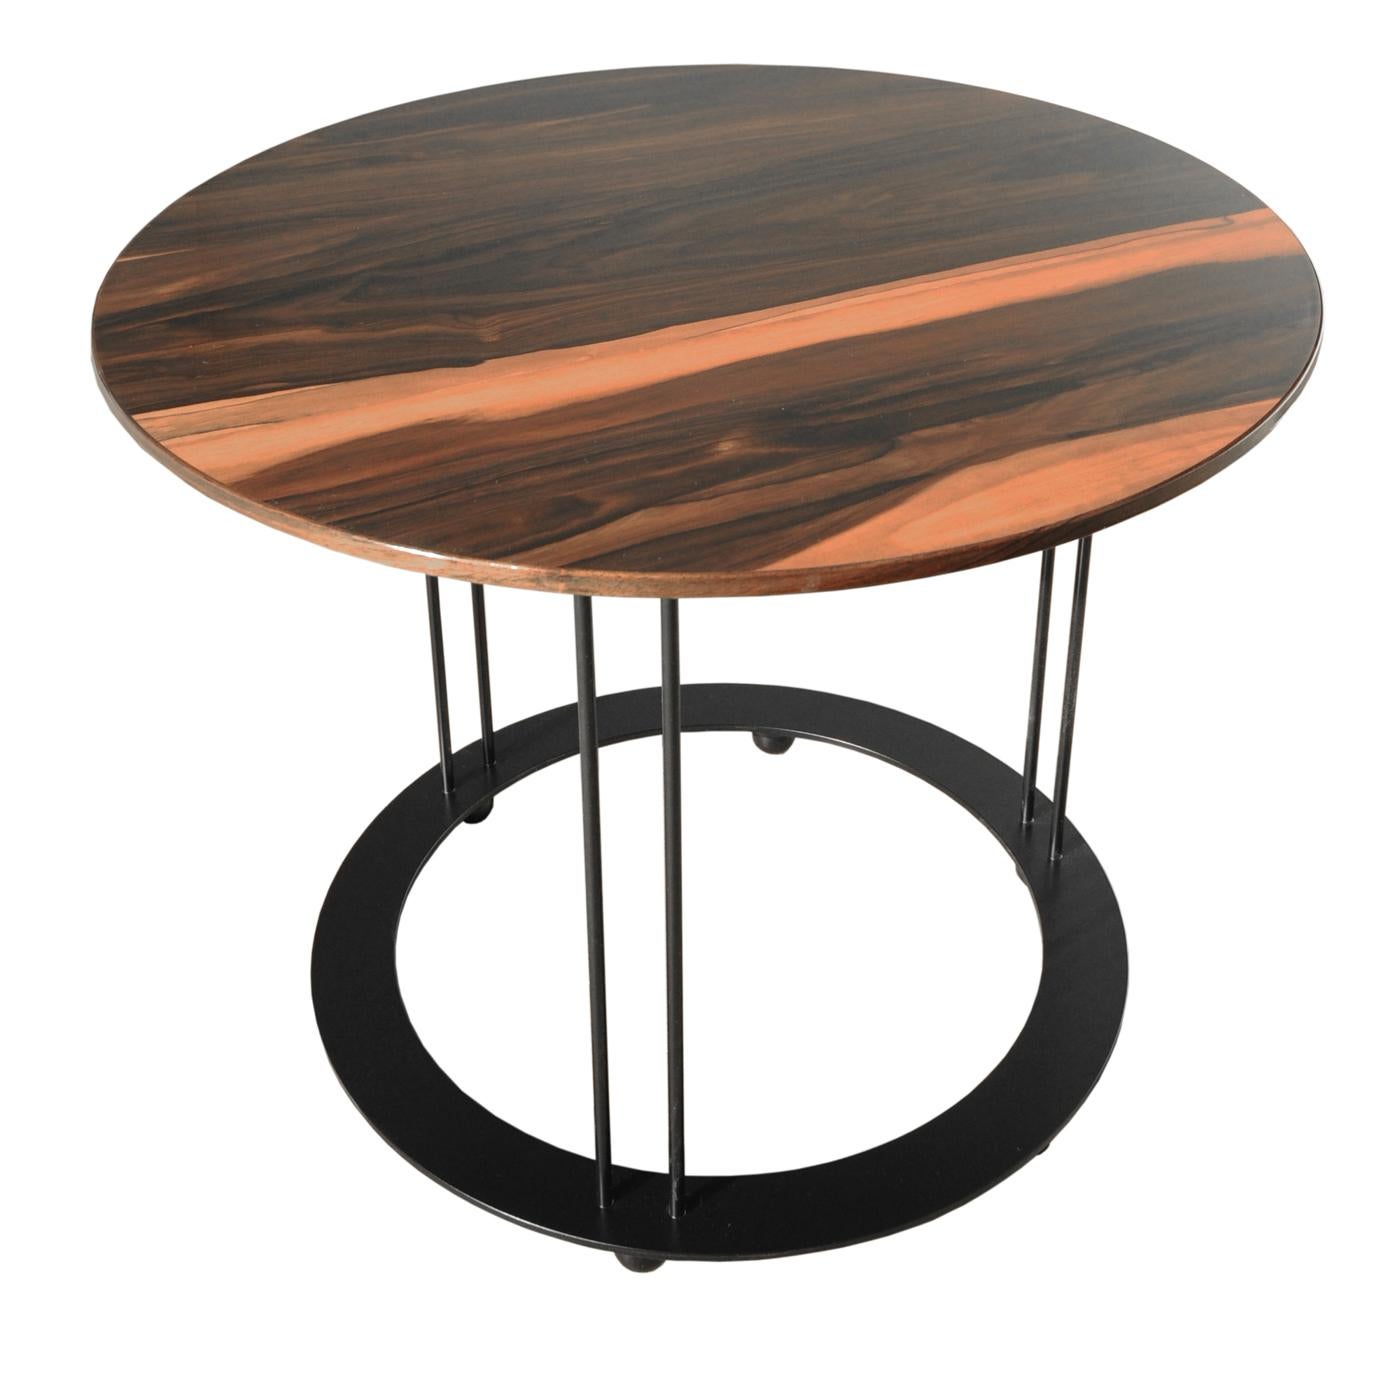 A splendid addition to a refined, contemporary decor, this coffee table will elevate the look of an entryway, hallway, or living room. Crafted of Makassar ebony, the round top showcases natural hues and superbly rests on a sturdy metal base with a